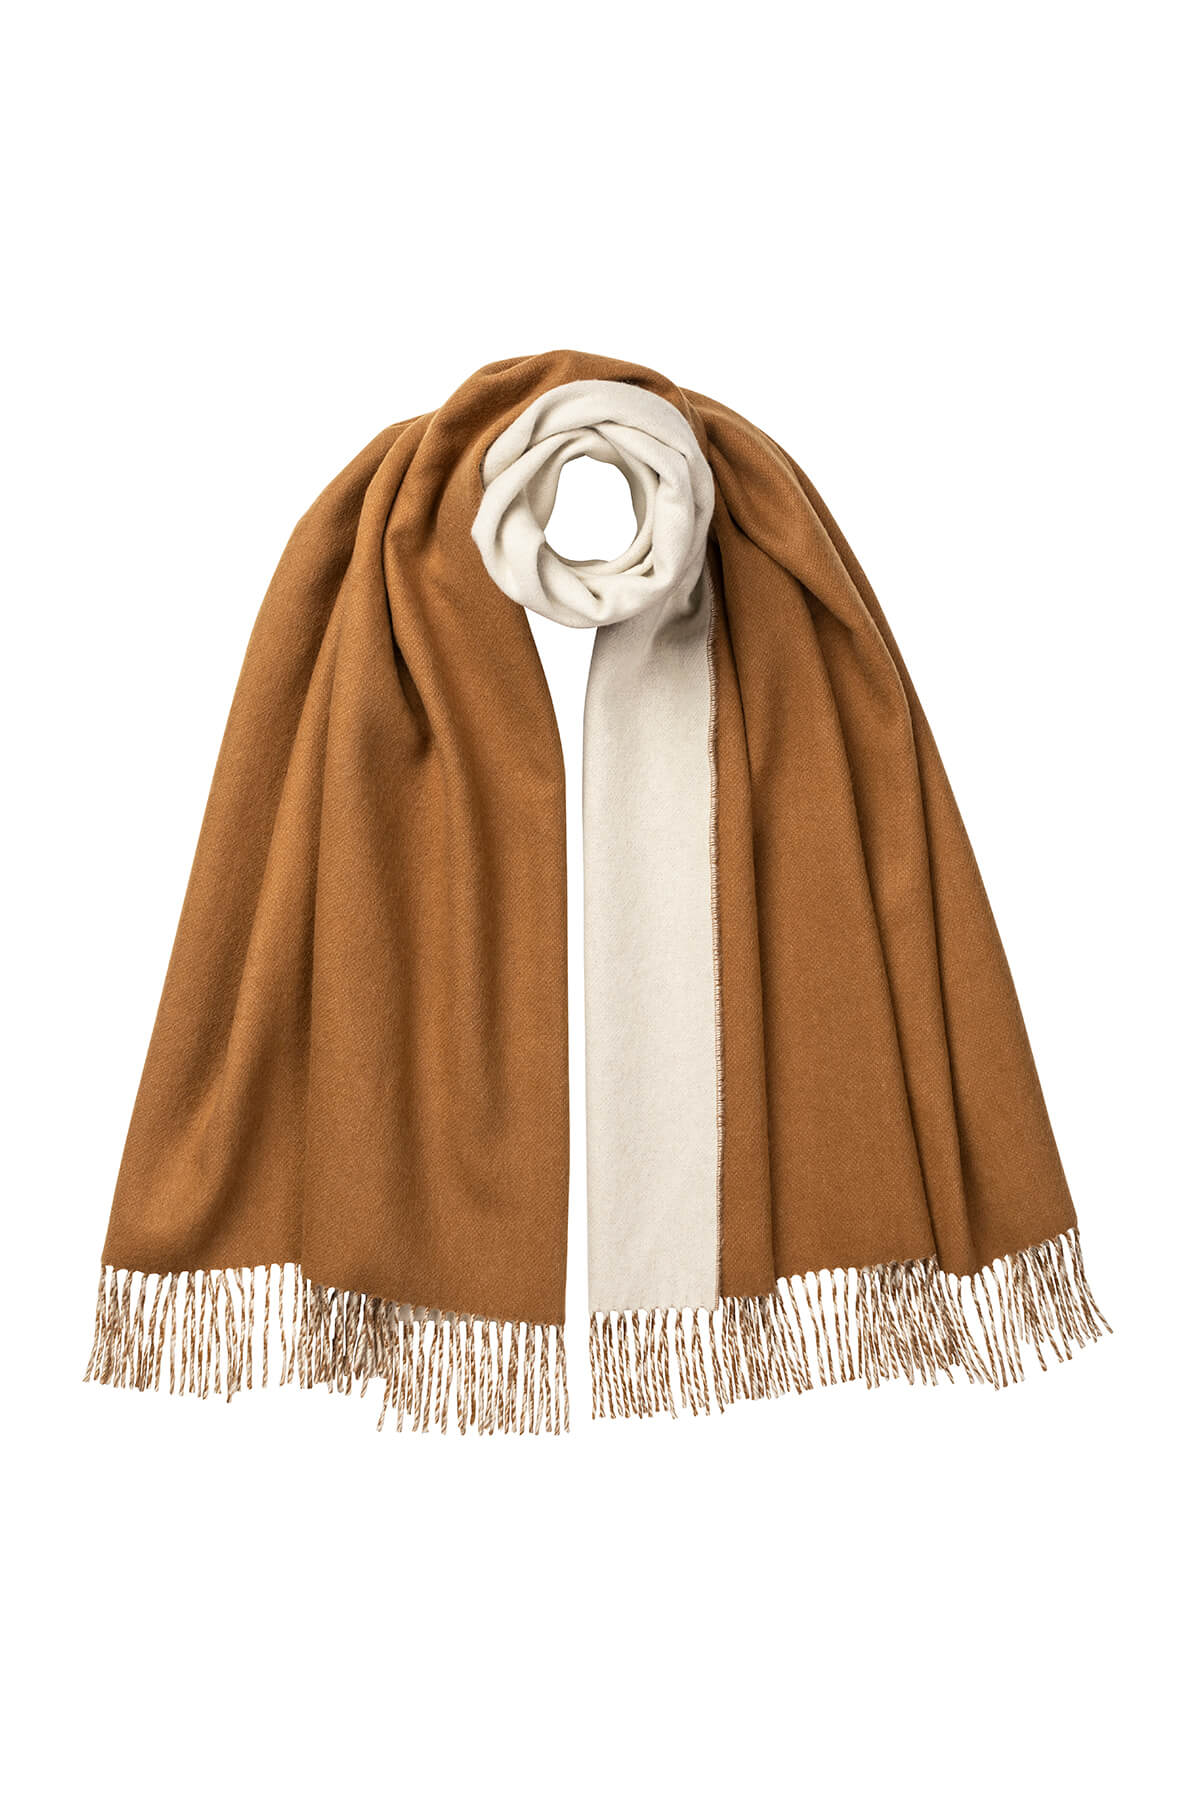 Johnstons of Elgin Reversible Cashmere Stole in Dark Camel on a white background WA000585RU5244ONE